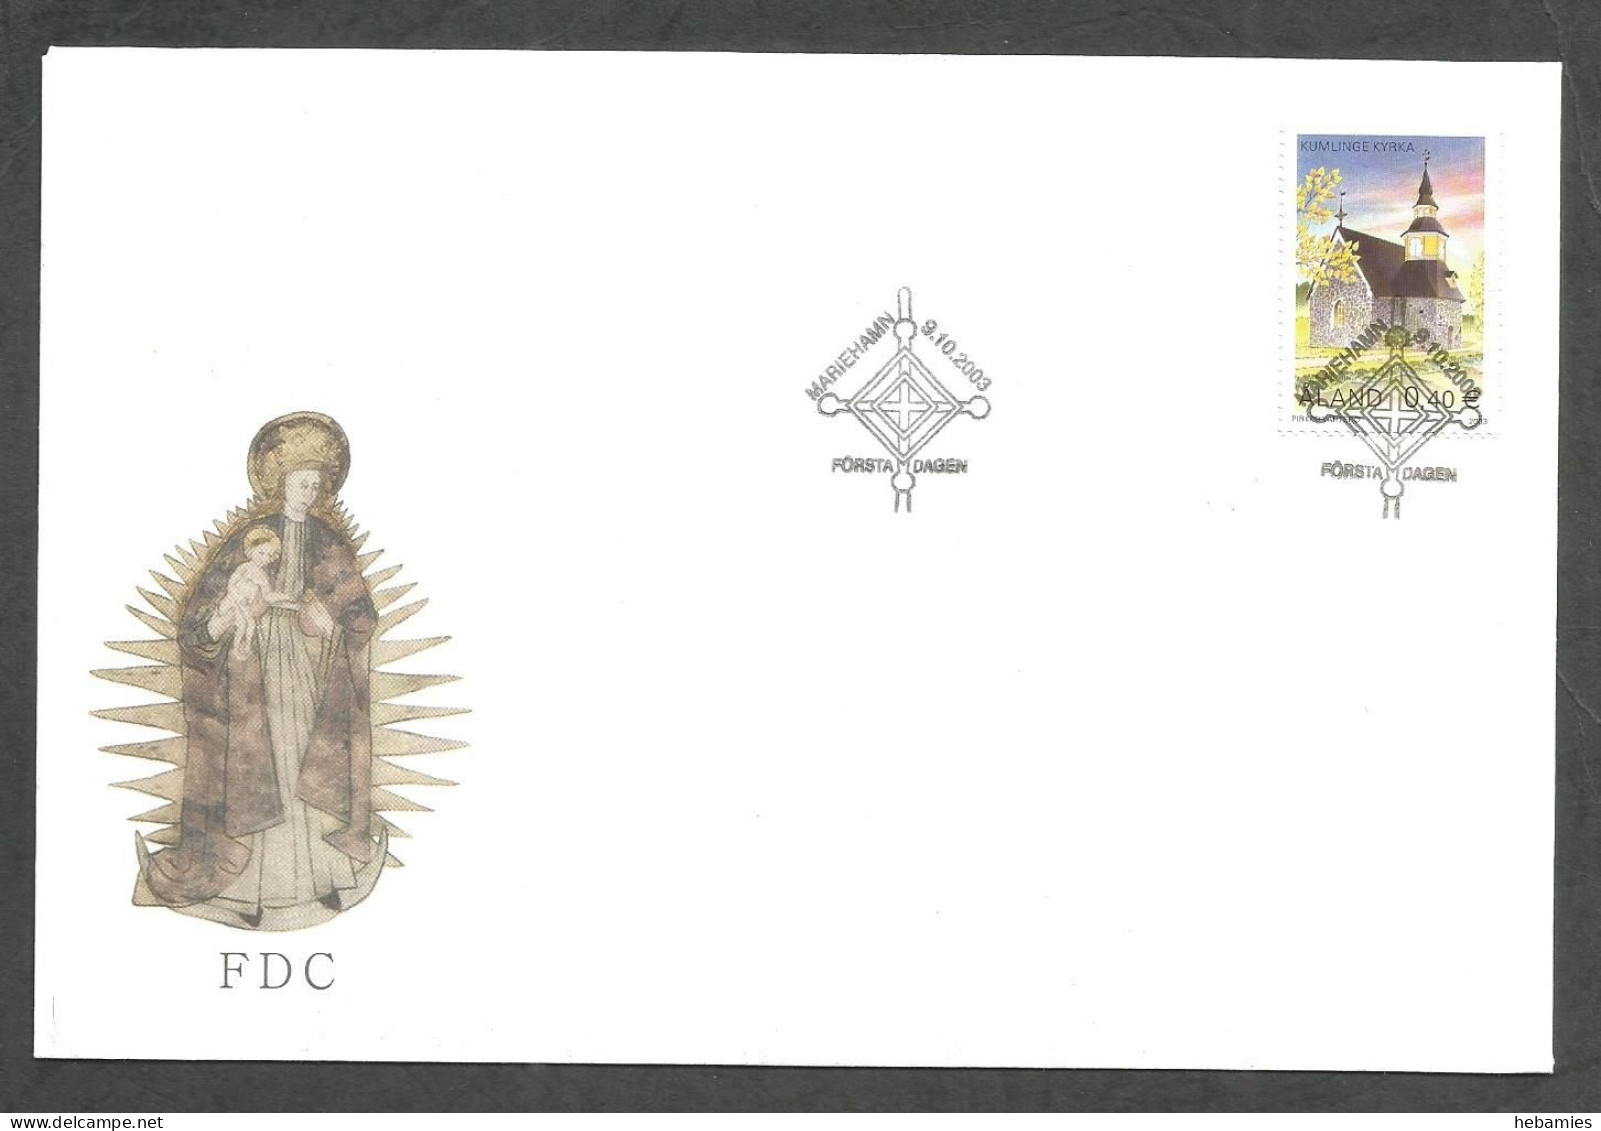 ÅLAND - 4 FDC COVERs Lot 2003 - The POST Of ÅLAND - - Aland